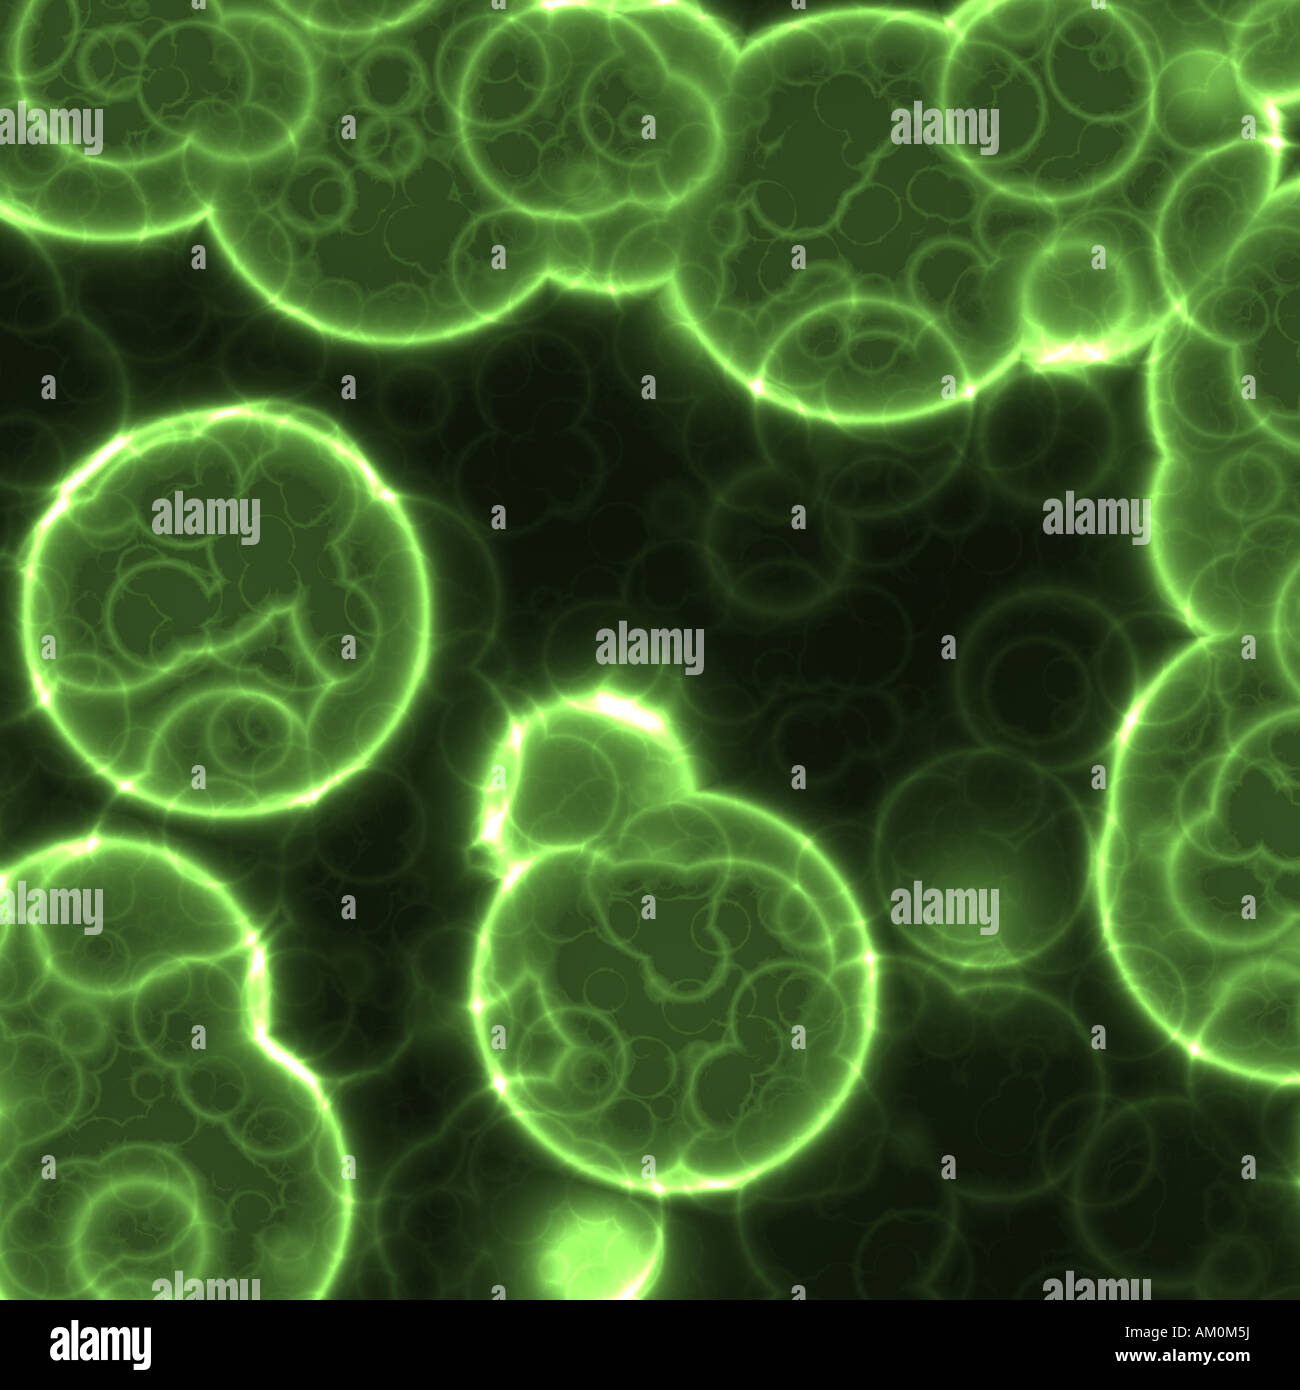 a large background image of cells or bacteria under the microscope Stock Photo